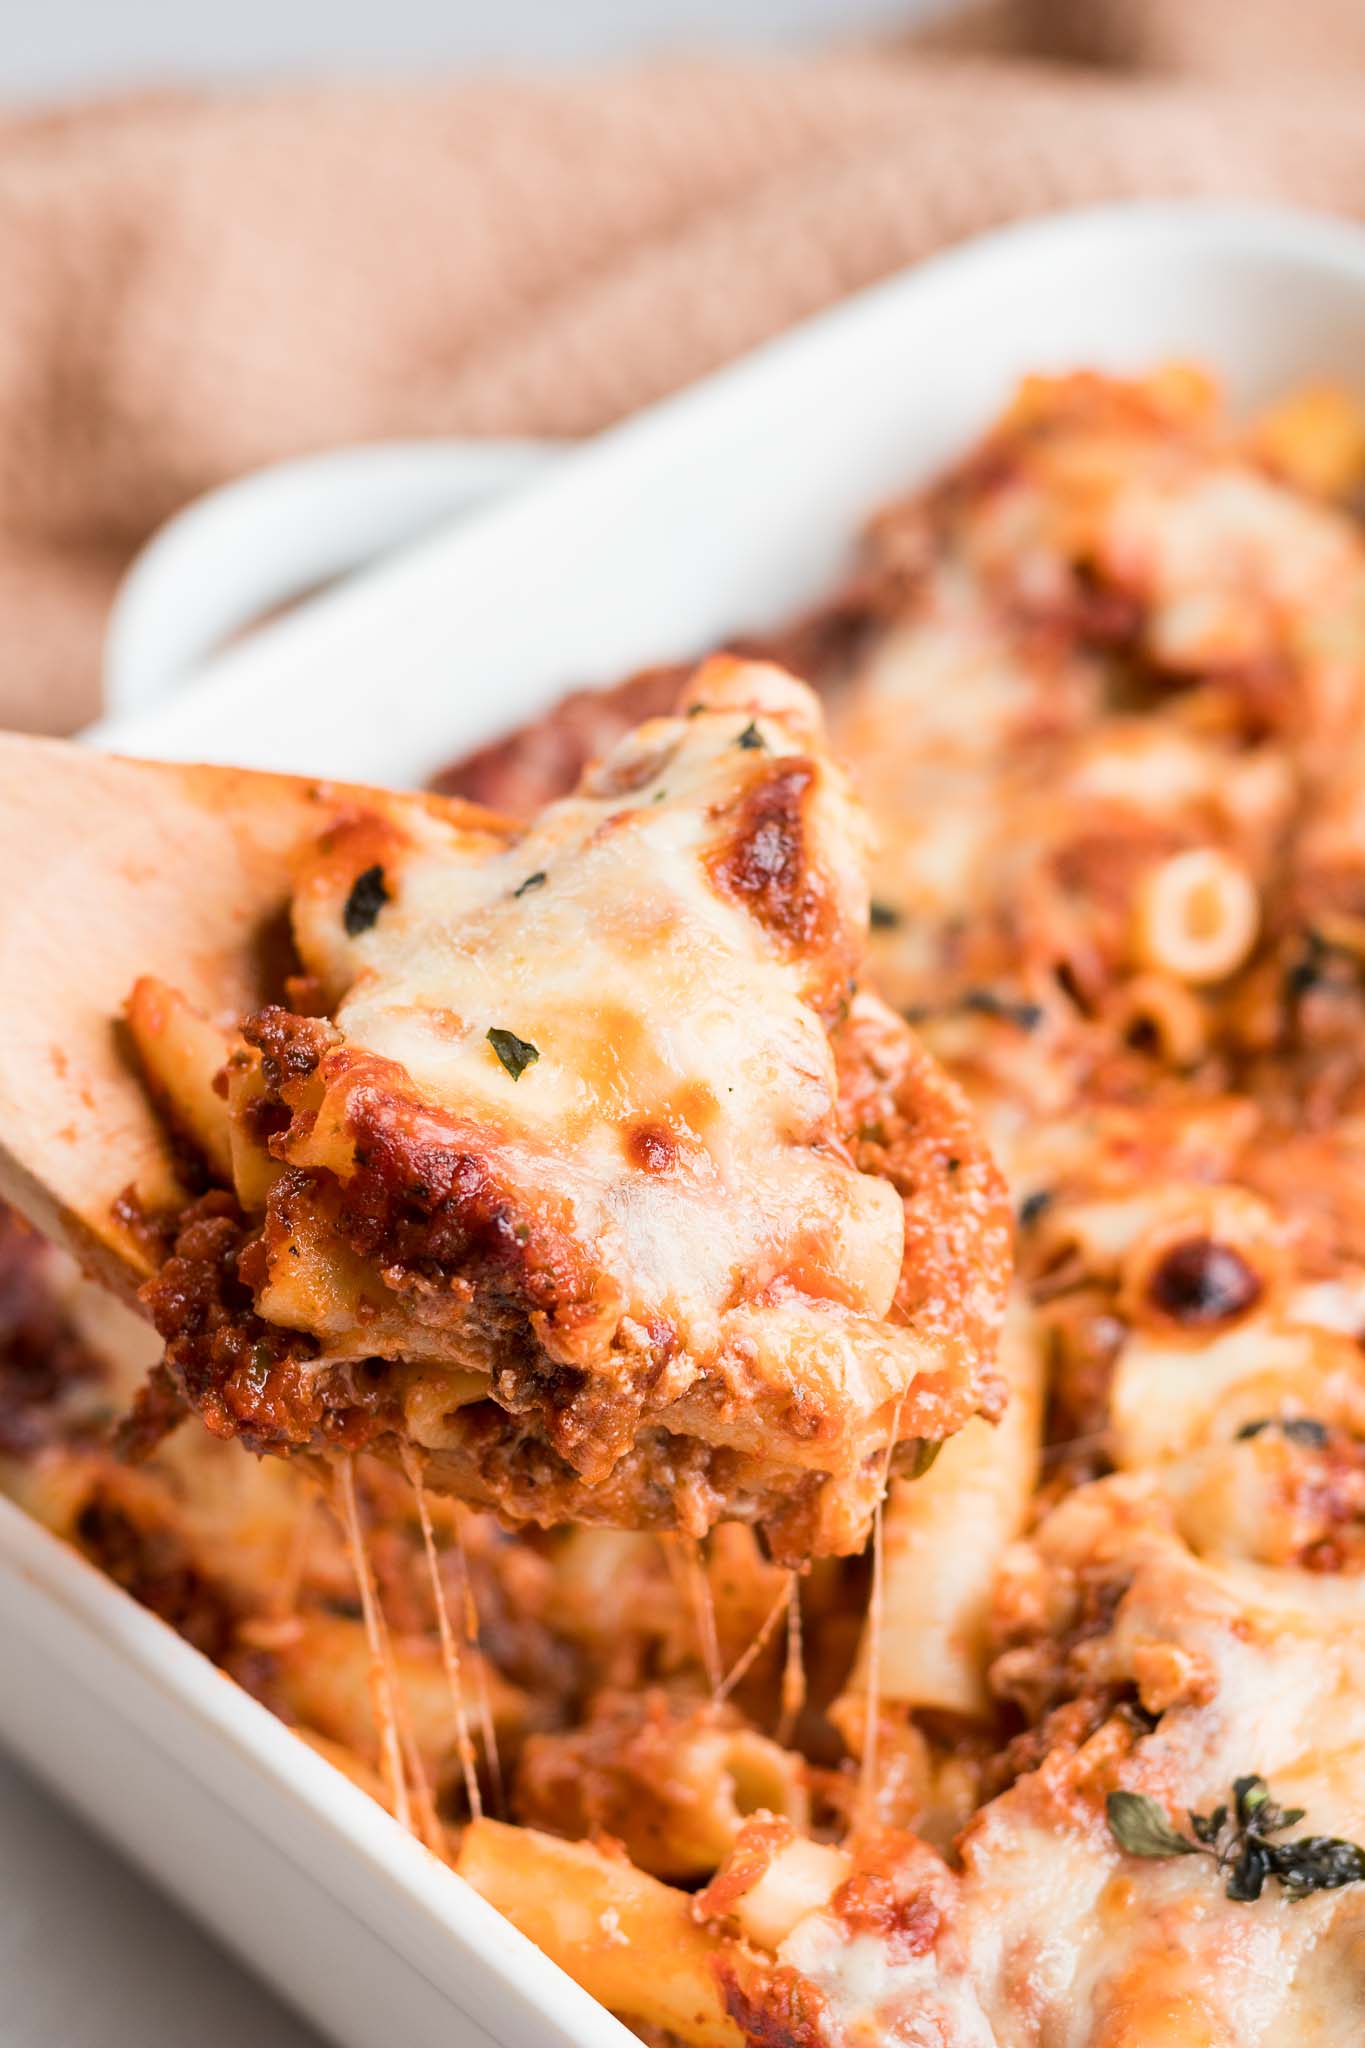 Baked Ziti - BEYOND THE NOMS